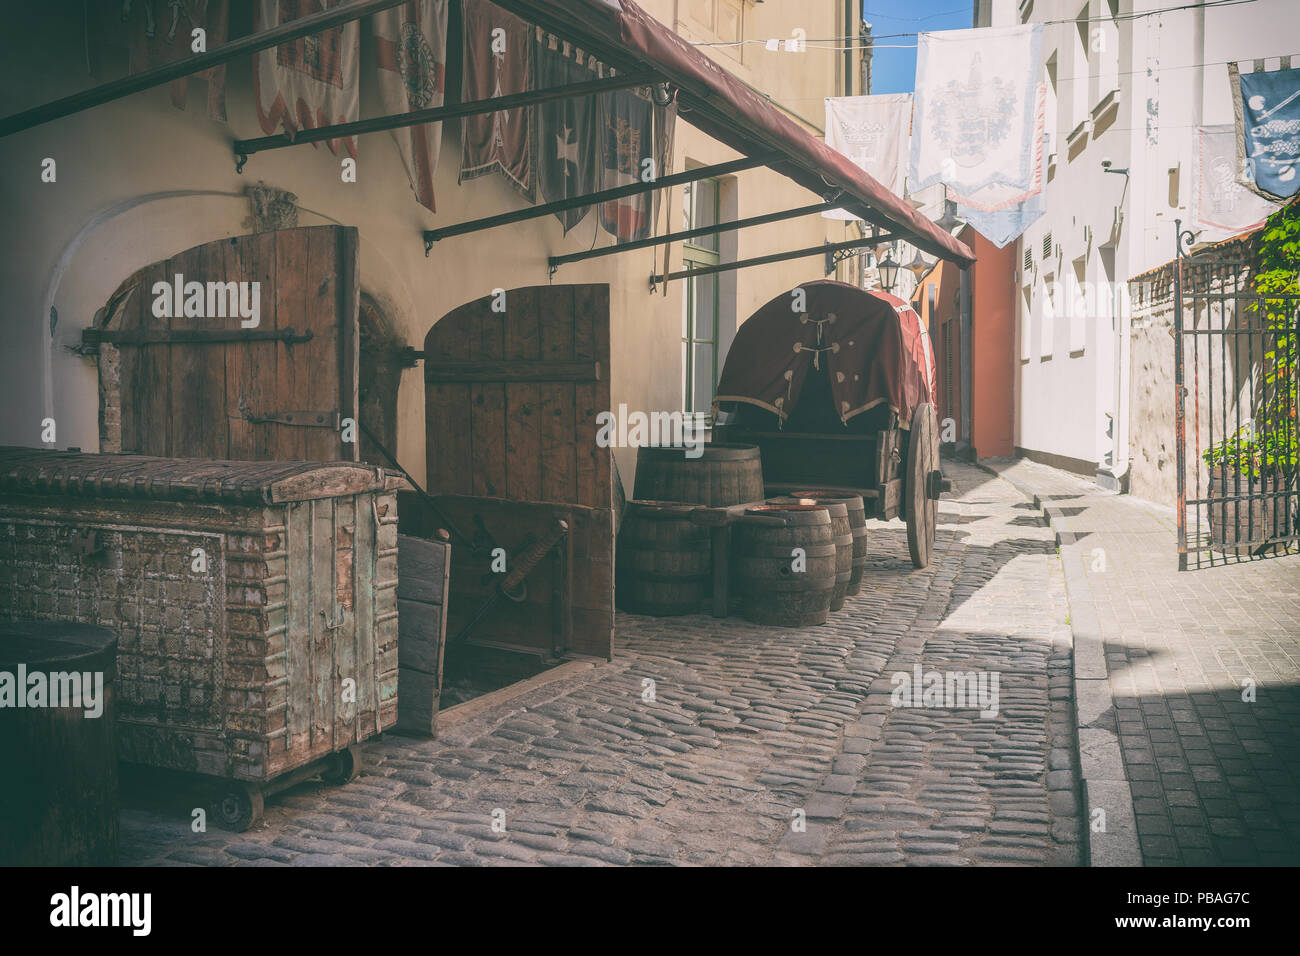 Stylized medieval street with a cart and oak barrels under the standards on the walls in Riga Stock Photo